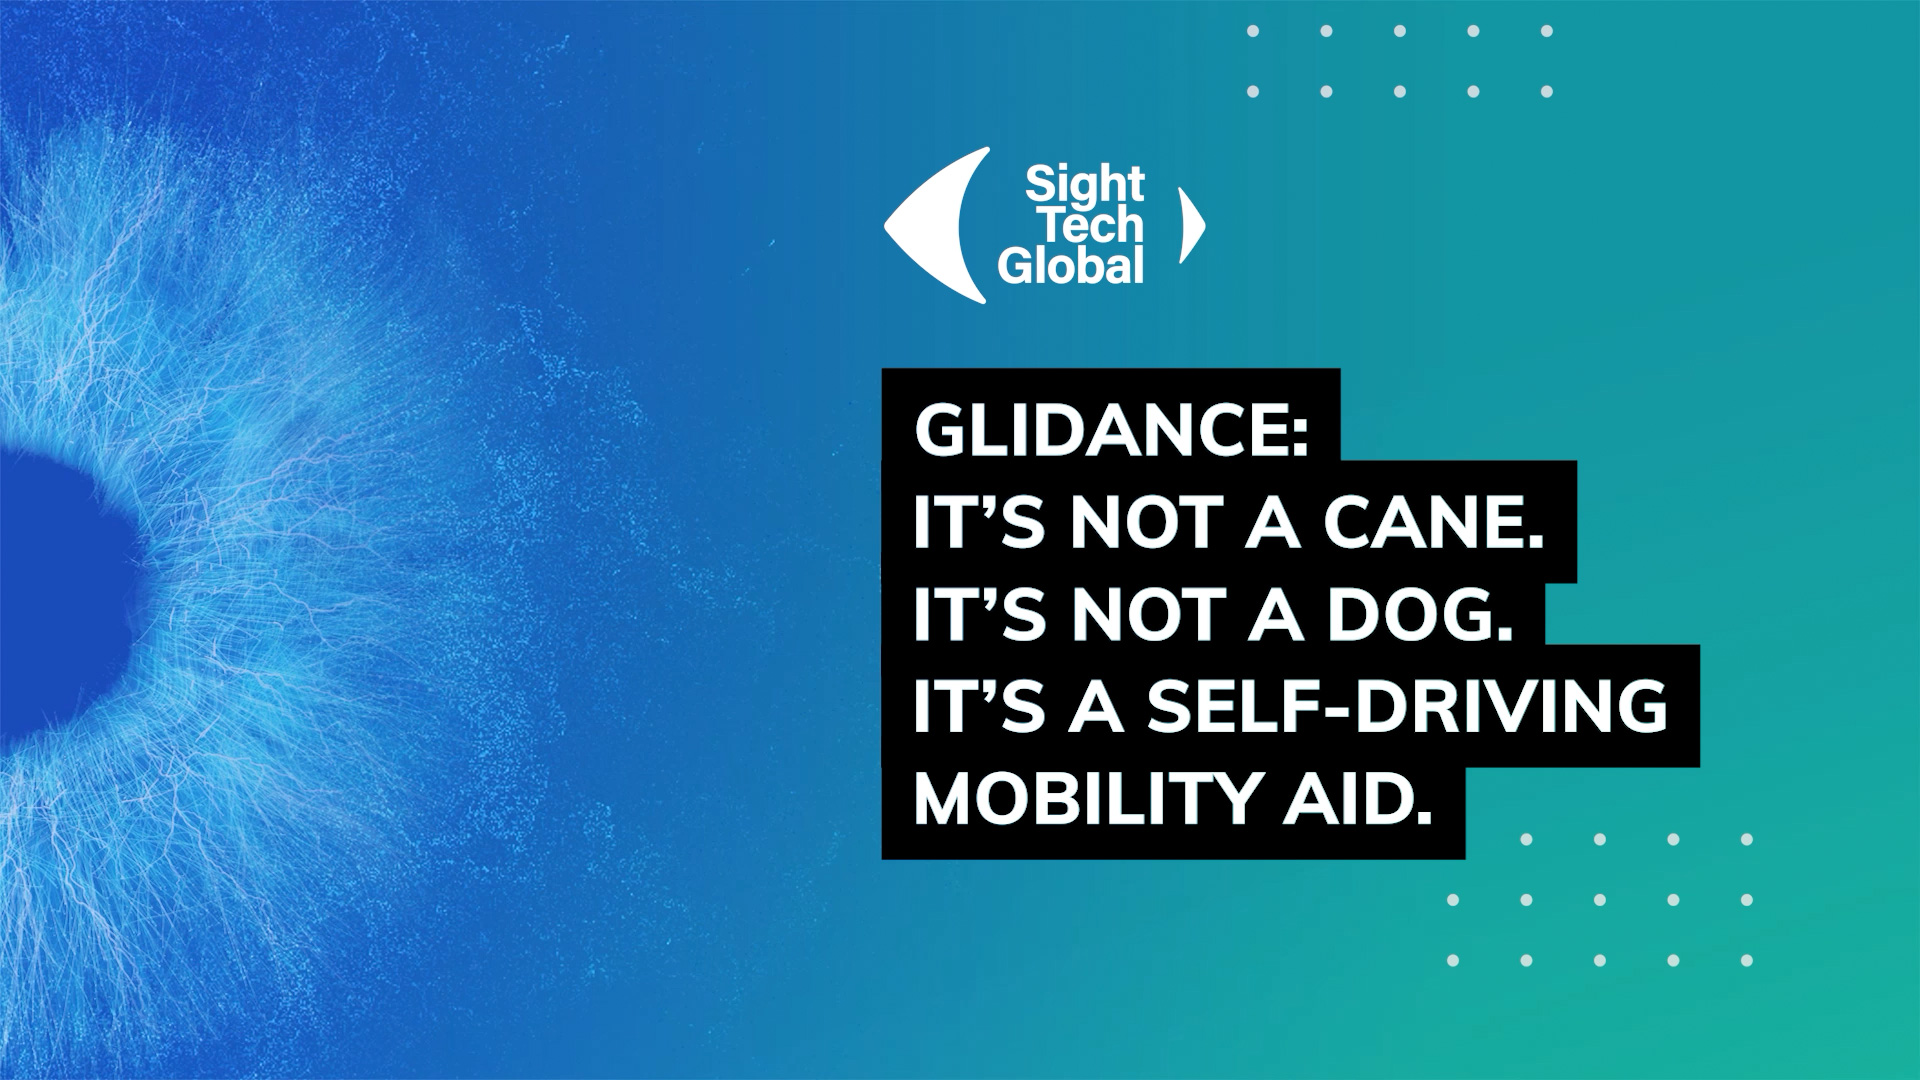 Glidance: It’s not a cane. It’s not a dog. It’s a self-driving mobility aid.